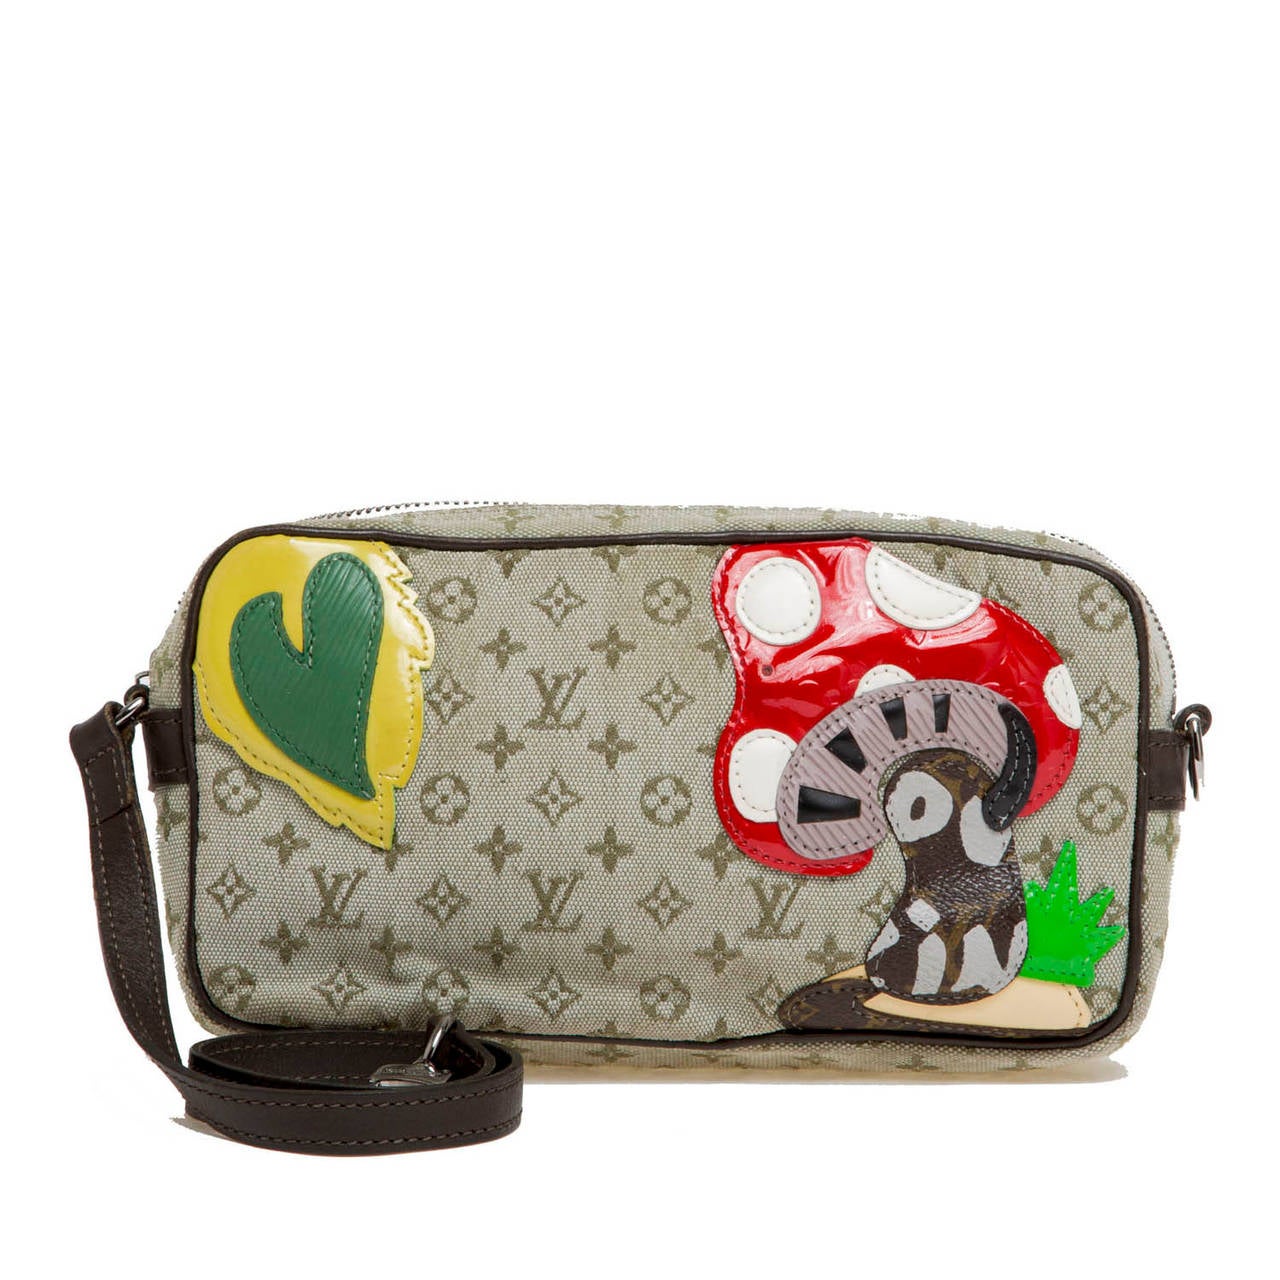 This authentic limited edition Louis Vuitton Conte de Fees Mushroom Pochette comes from Marc Jacob's highly inspired 